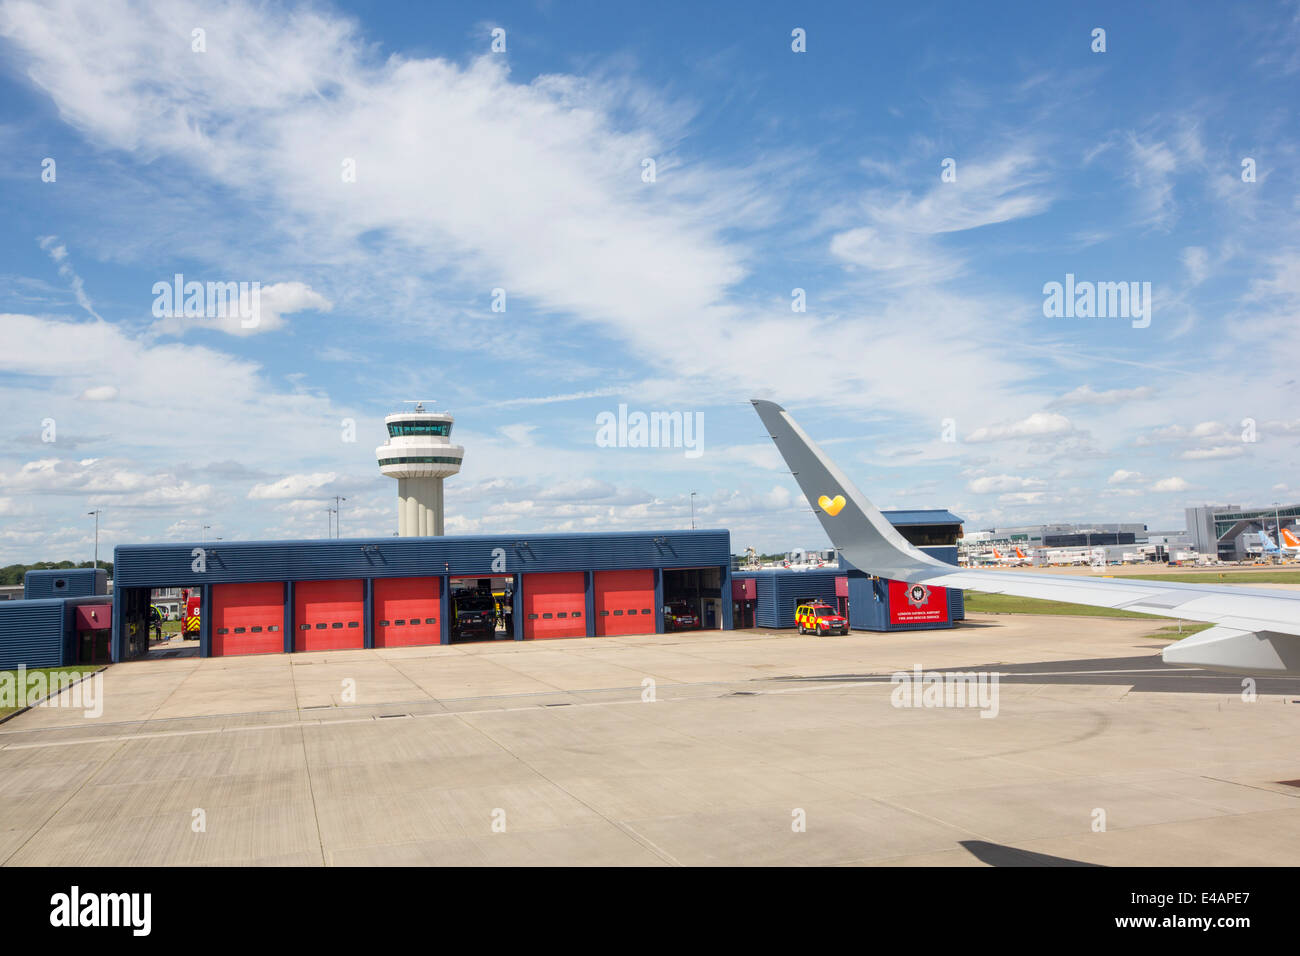 Coming in to land at Gatwick airport, UK Stock Photo - Alamy